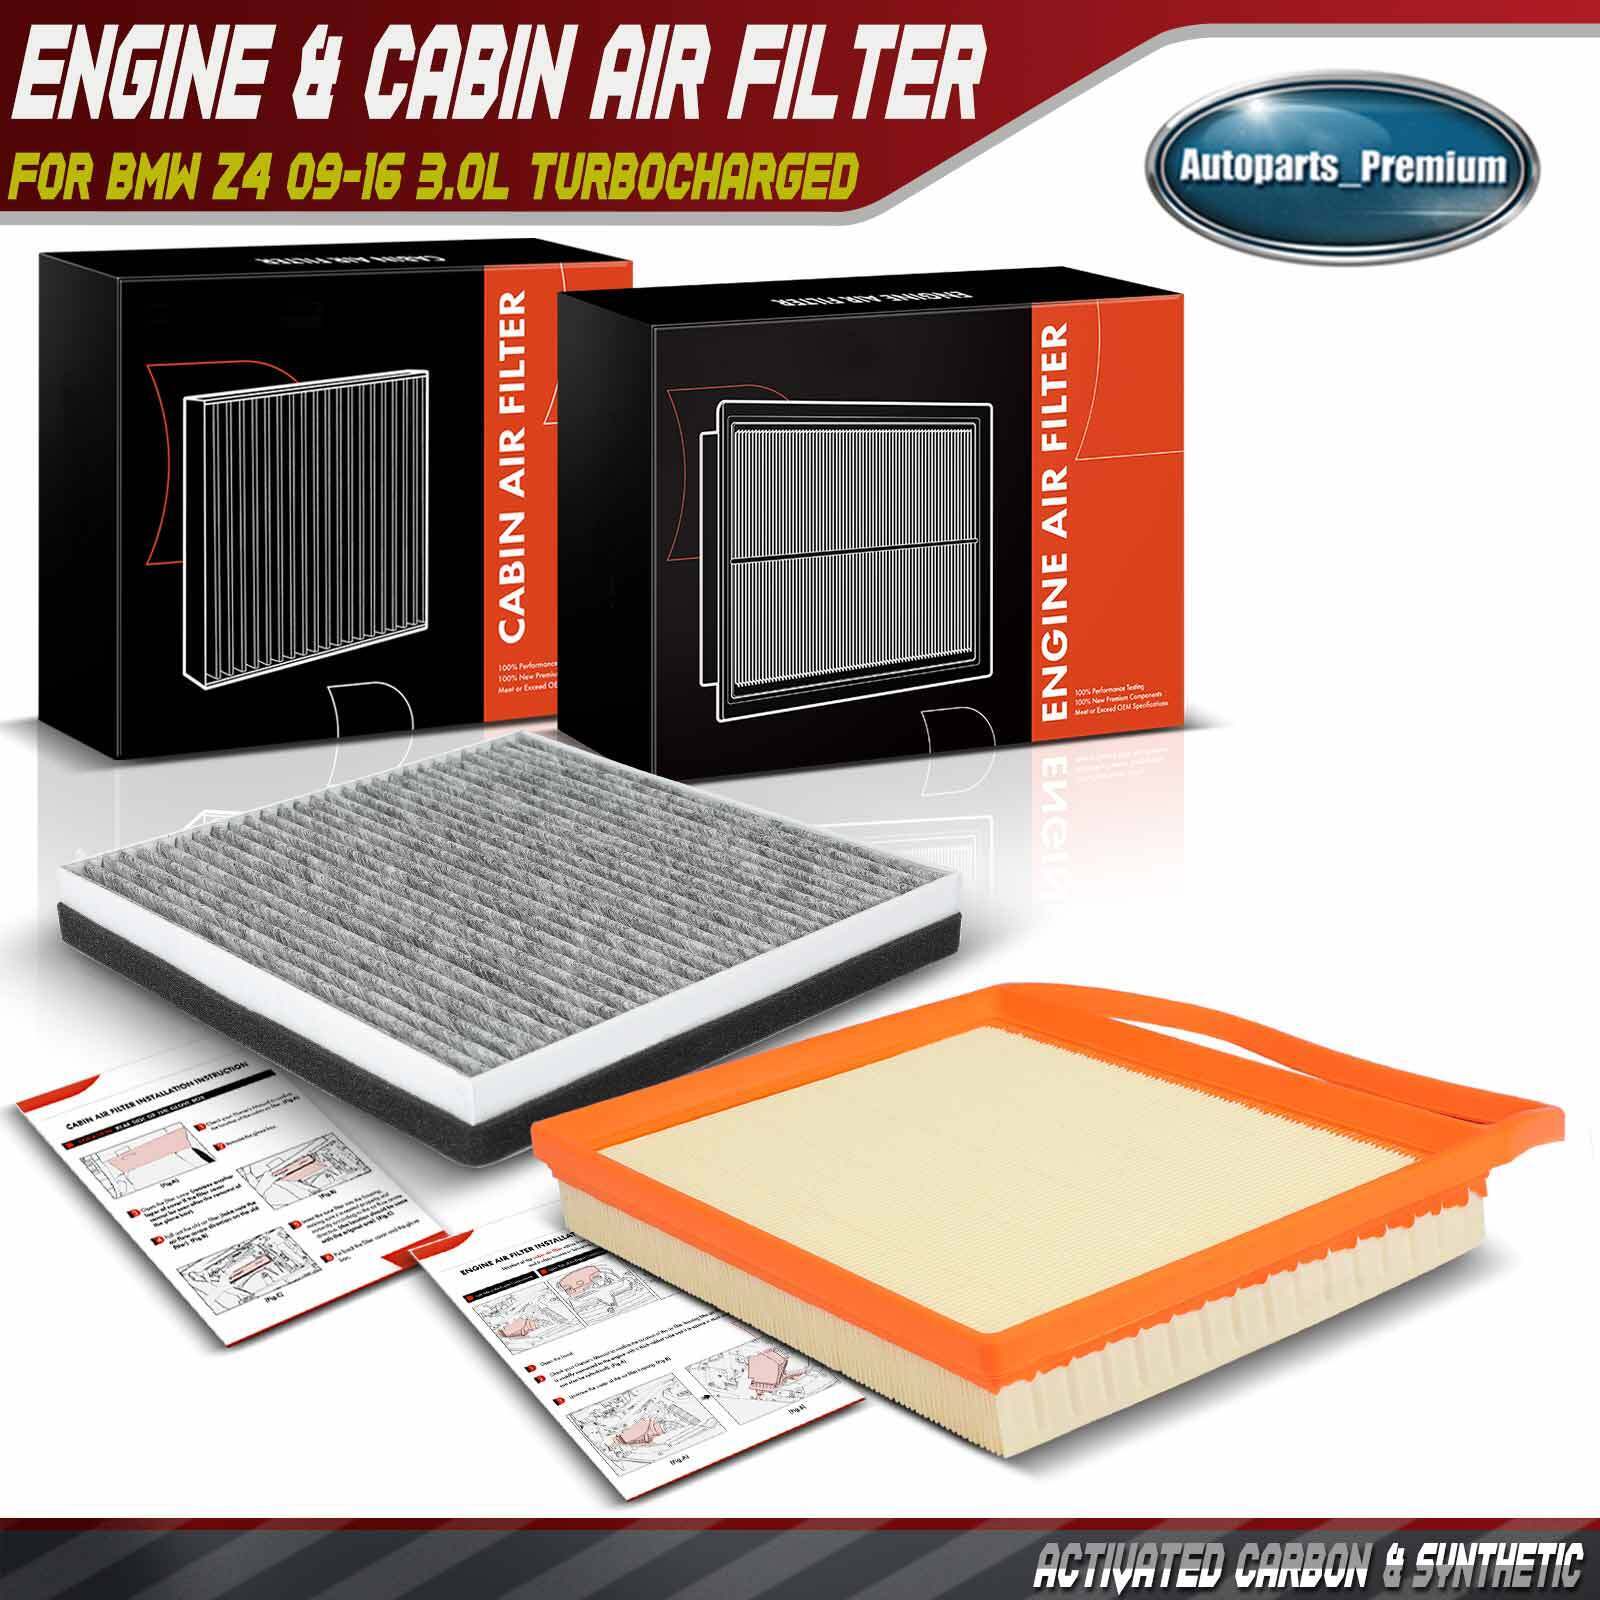 Engine & Activated Carbon Cabin Air Filter for BMW Z4 09-16 3.0L Turbocharged